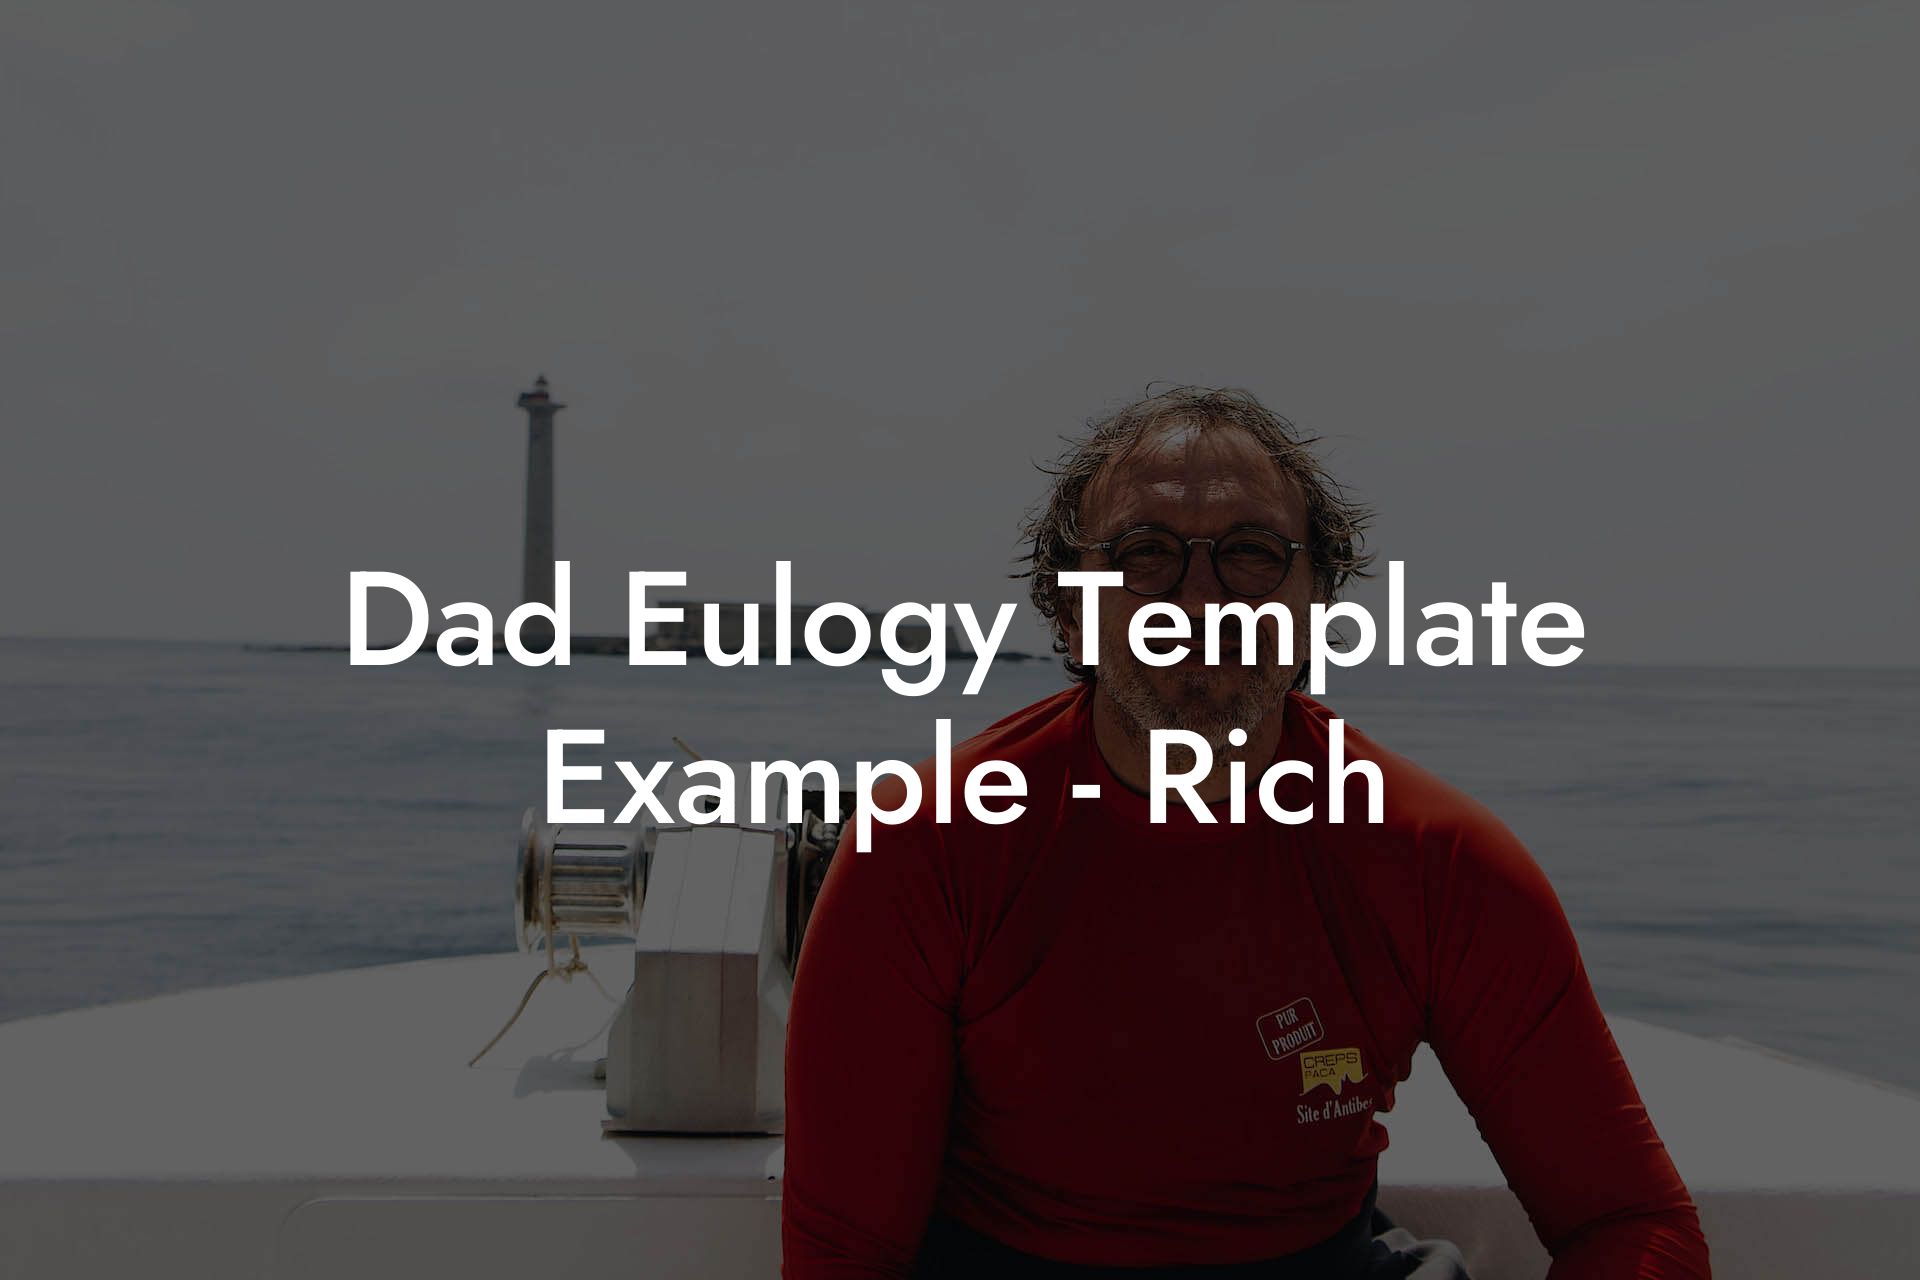 Dad Eulogy Template Example - Rich